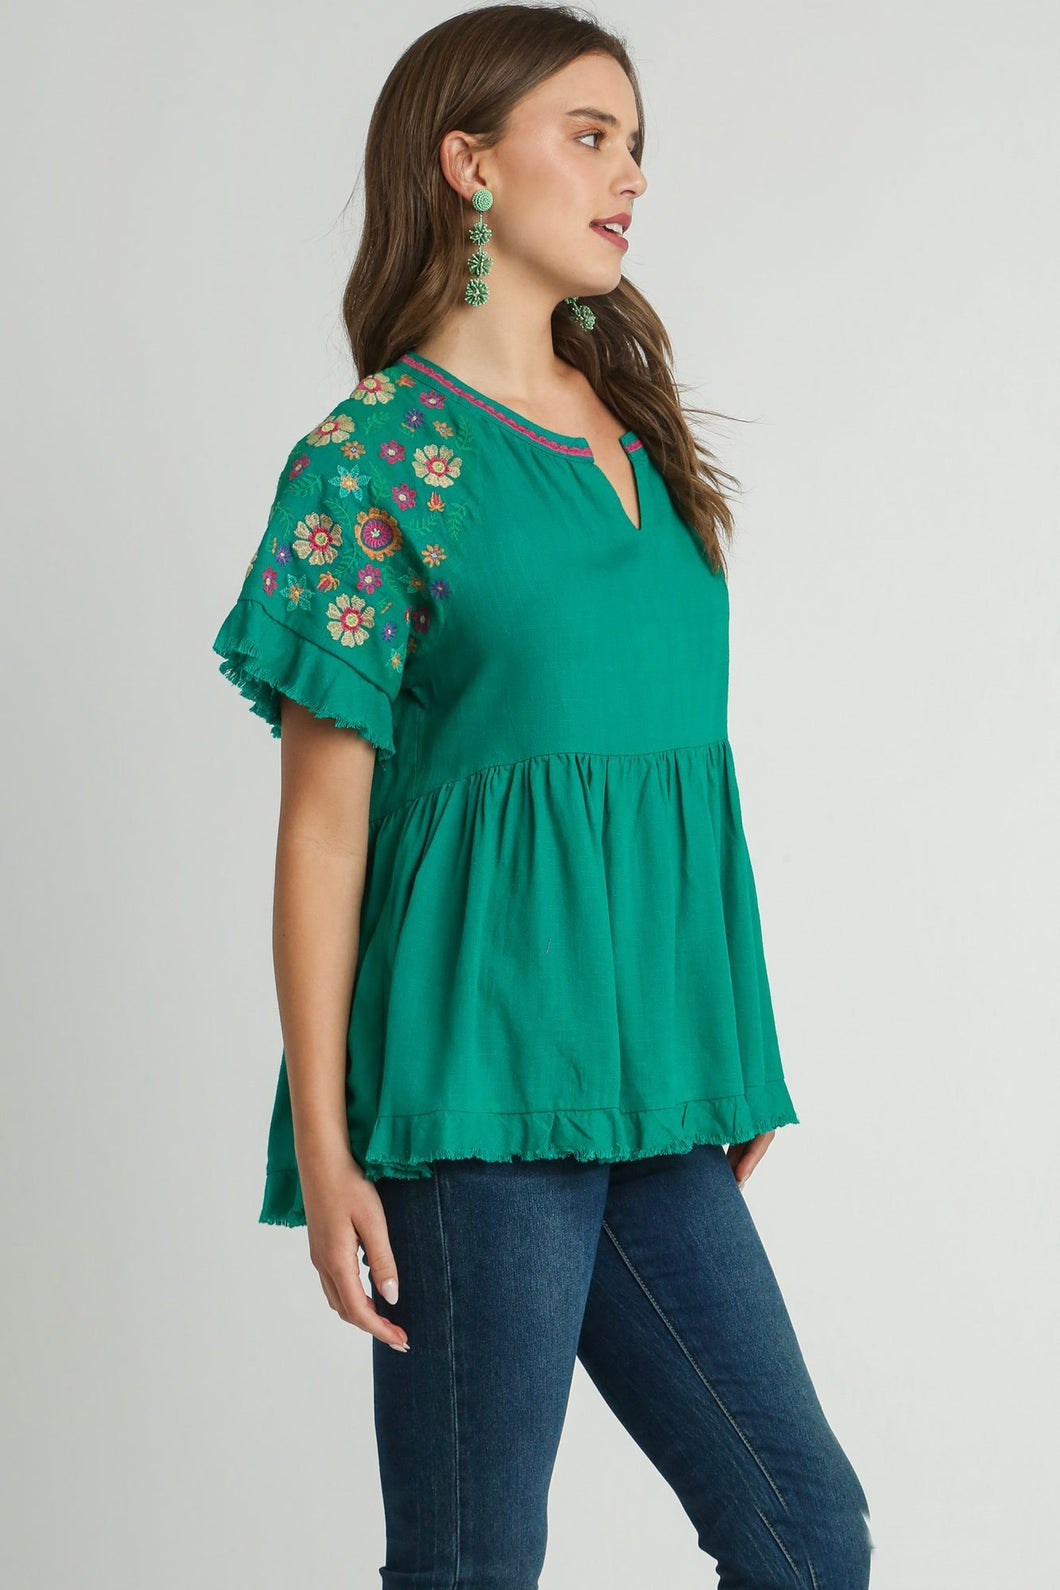 Umgee Linen Blend Babydoll Top with Embroidery Details in Emerald Green Shirts & Tops Umgee   